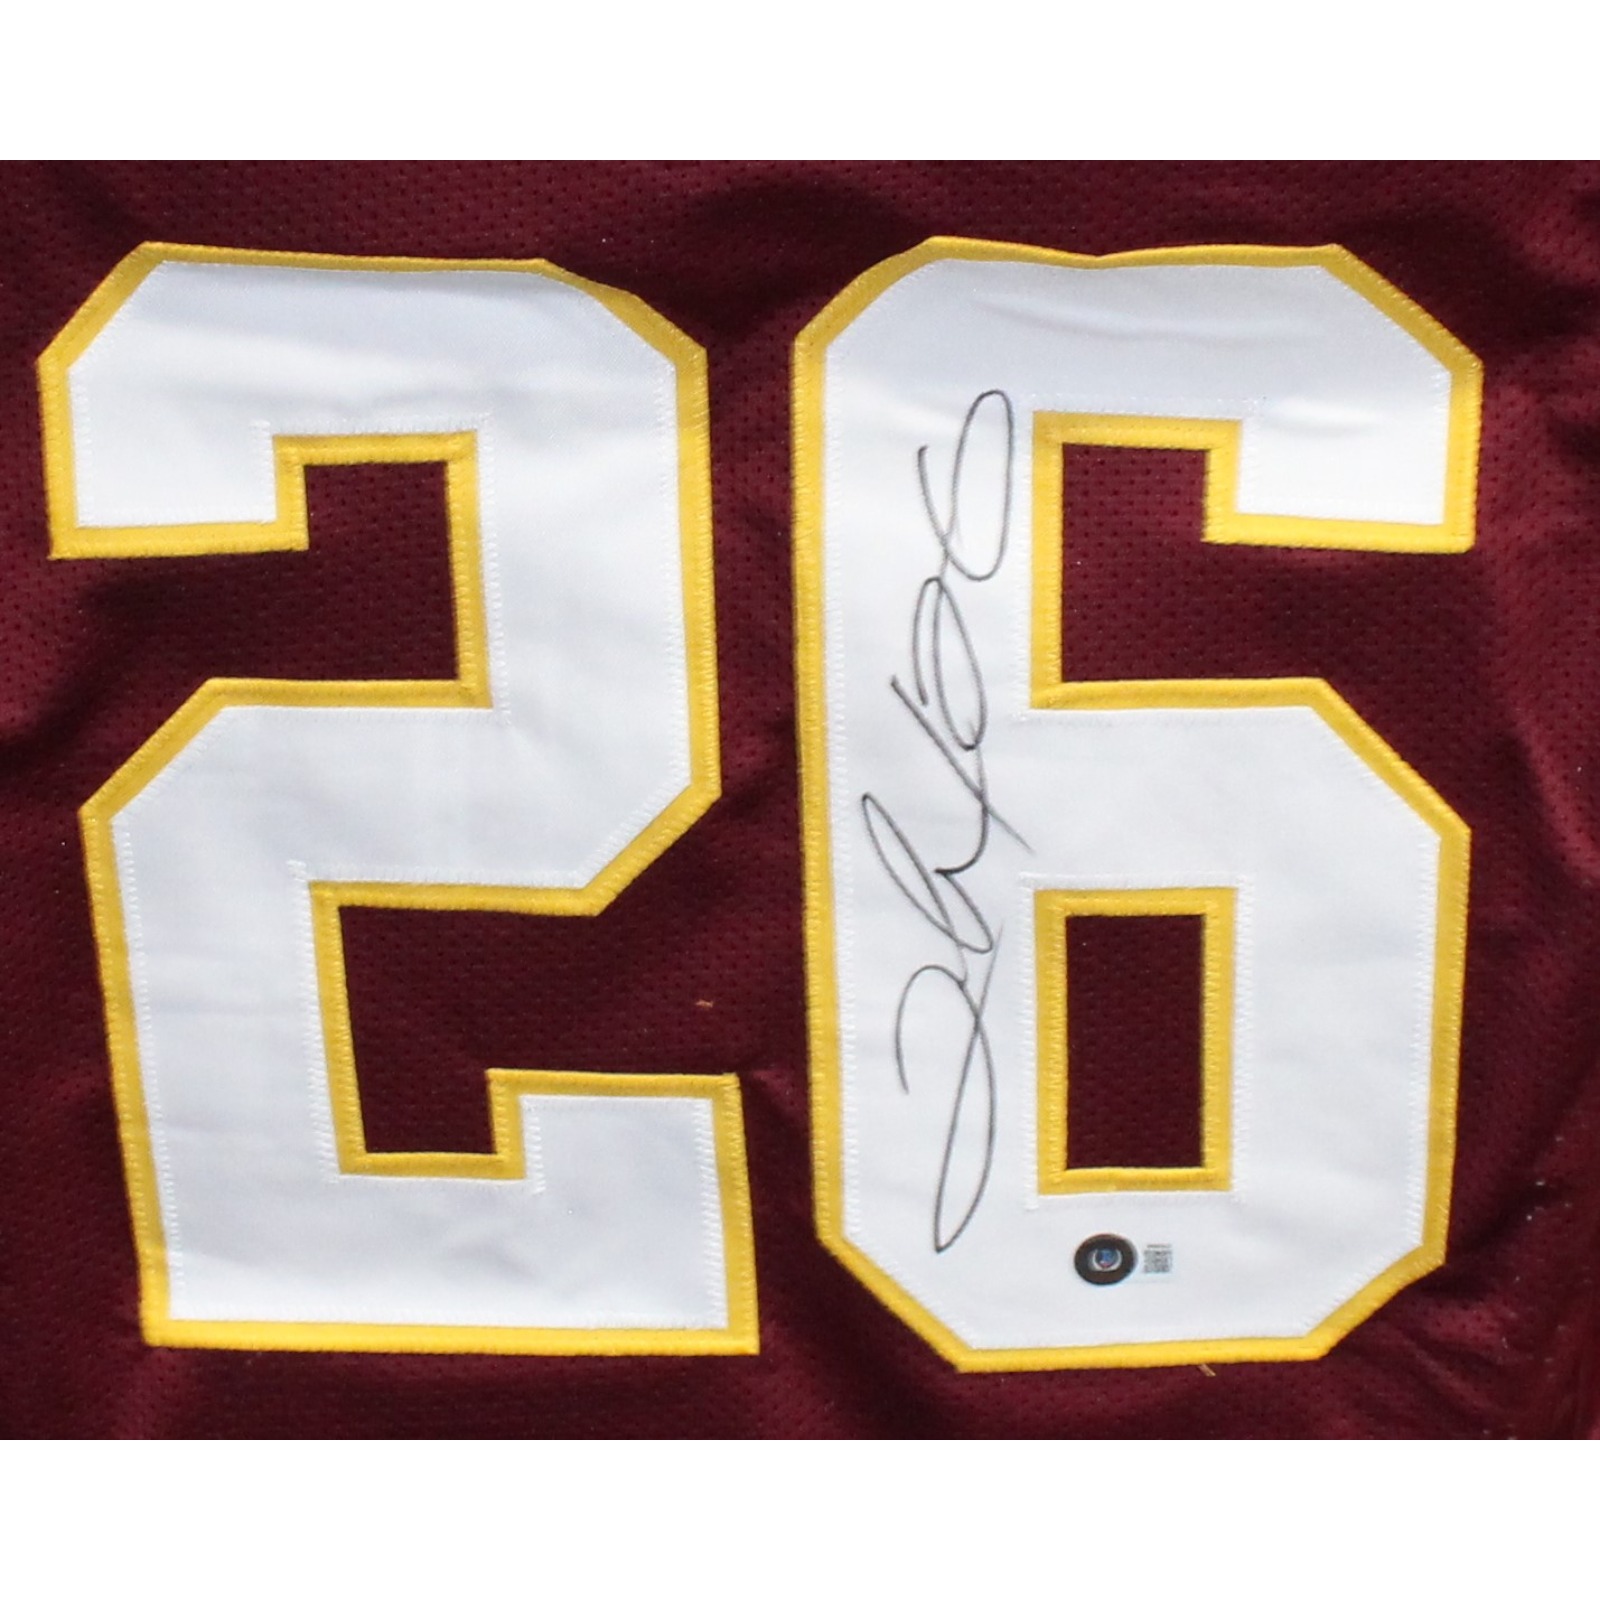 Clinton Portis Autographed/Signed Pro Style Jersey Red Beckett